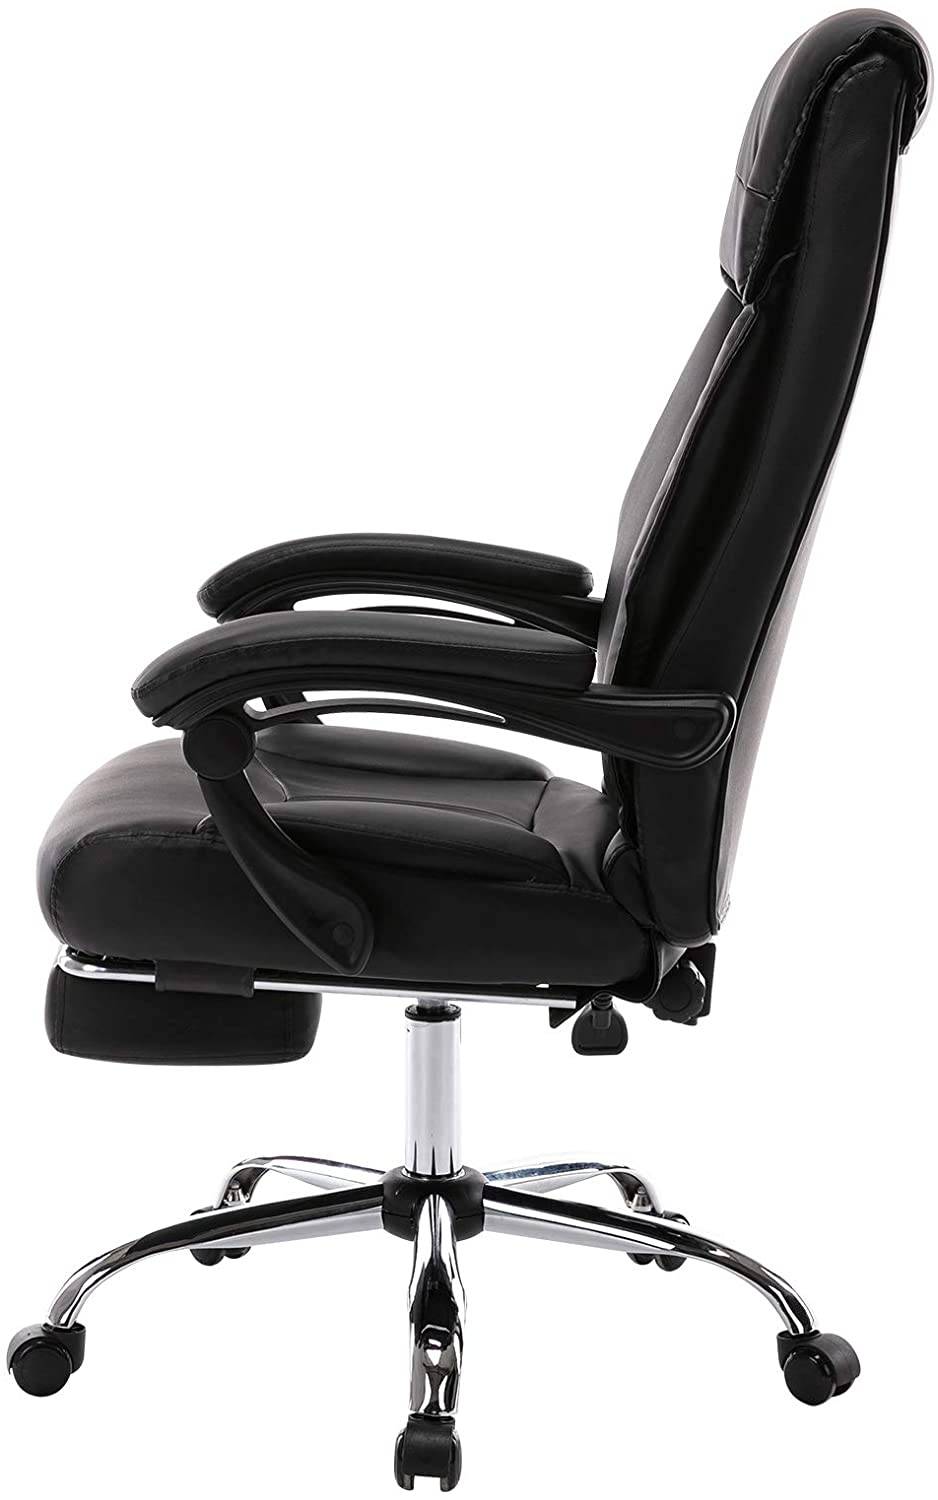 executive chair with footrest made of synthetic leather black